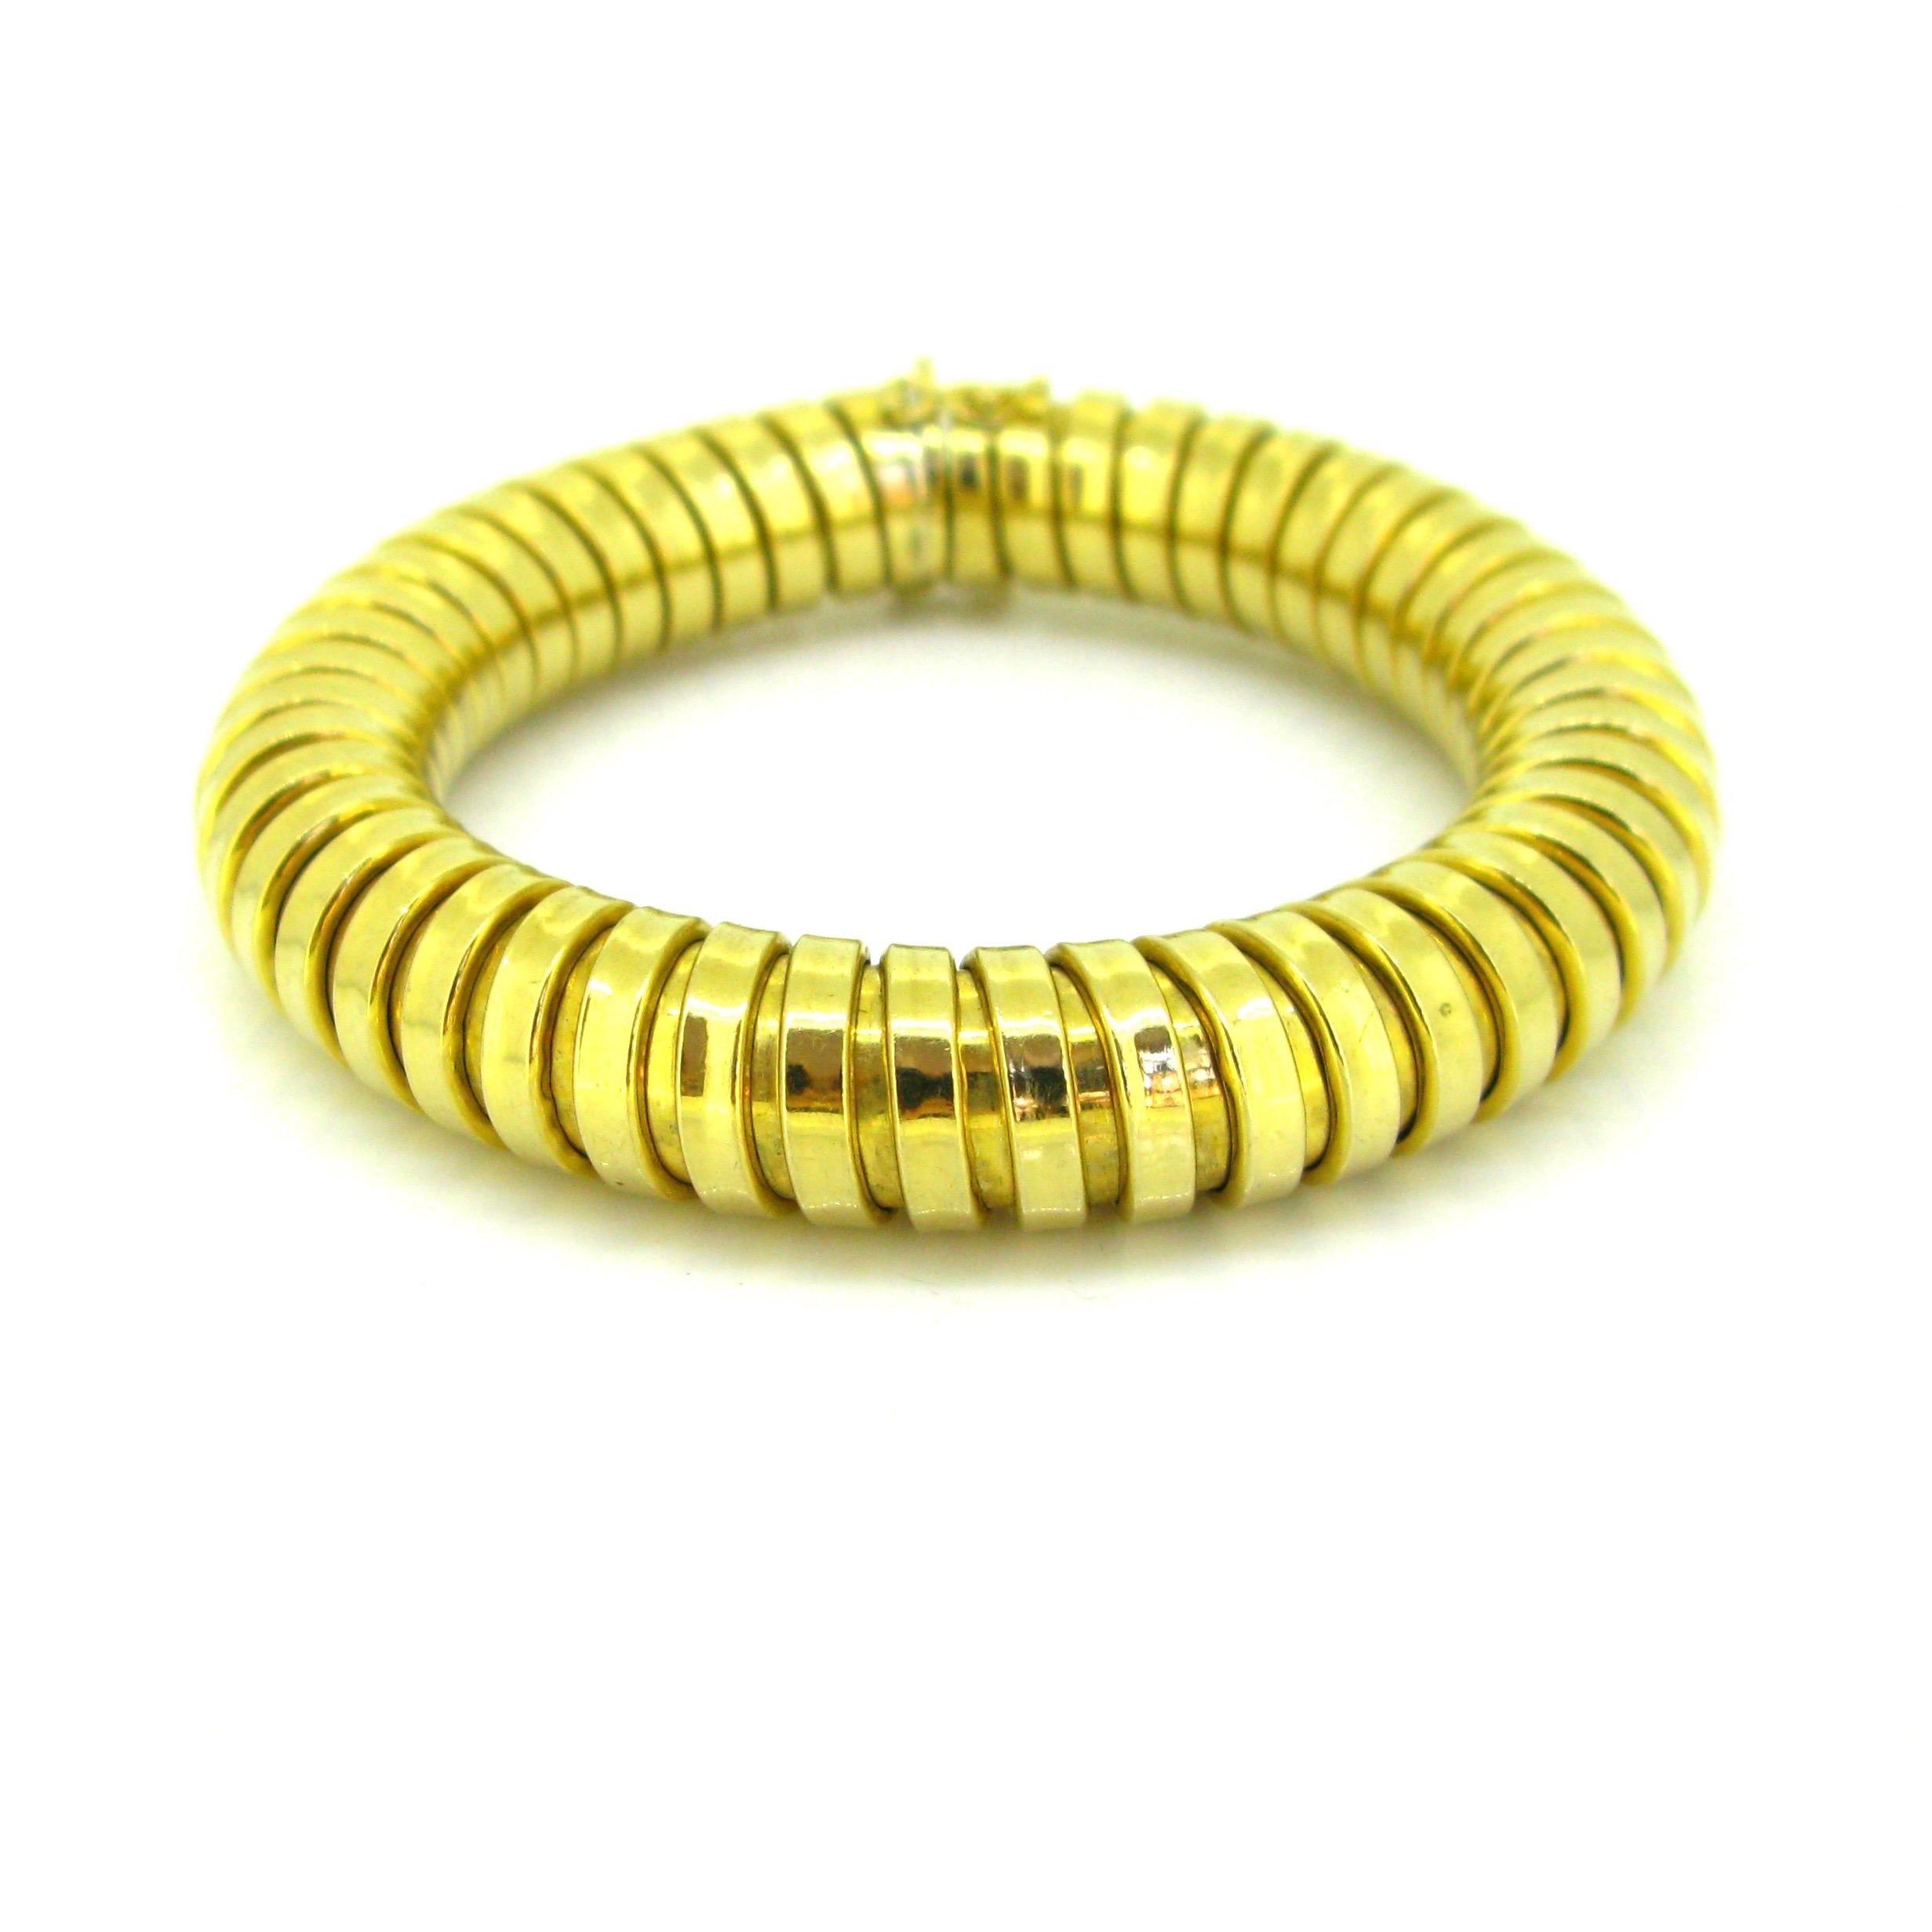 Weight: 56,13 gr

Metal: 18kt yellow gold

Condition: Very good

Comments: This ravishing flexible Gaspipe tubogas bracelet is fully made in 18k yellow gold. The gold is smooth and shiny. It is a very nice and a timeless piece of jewellery for